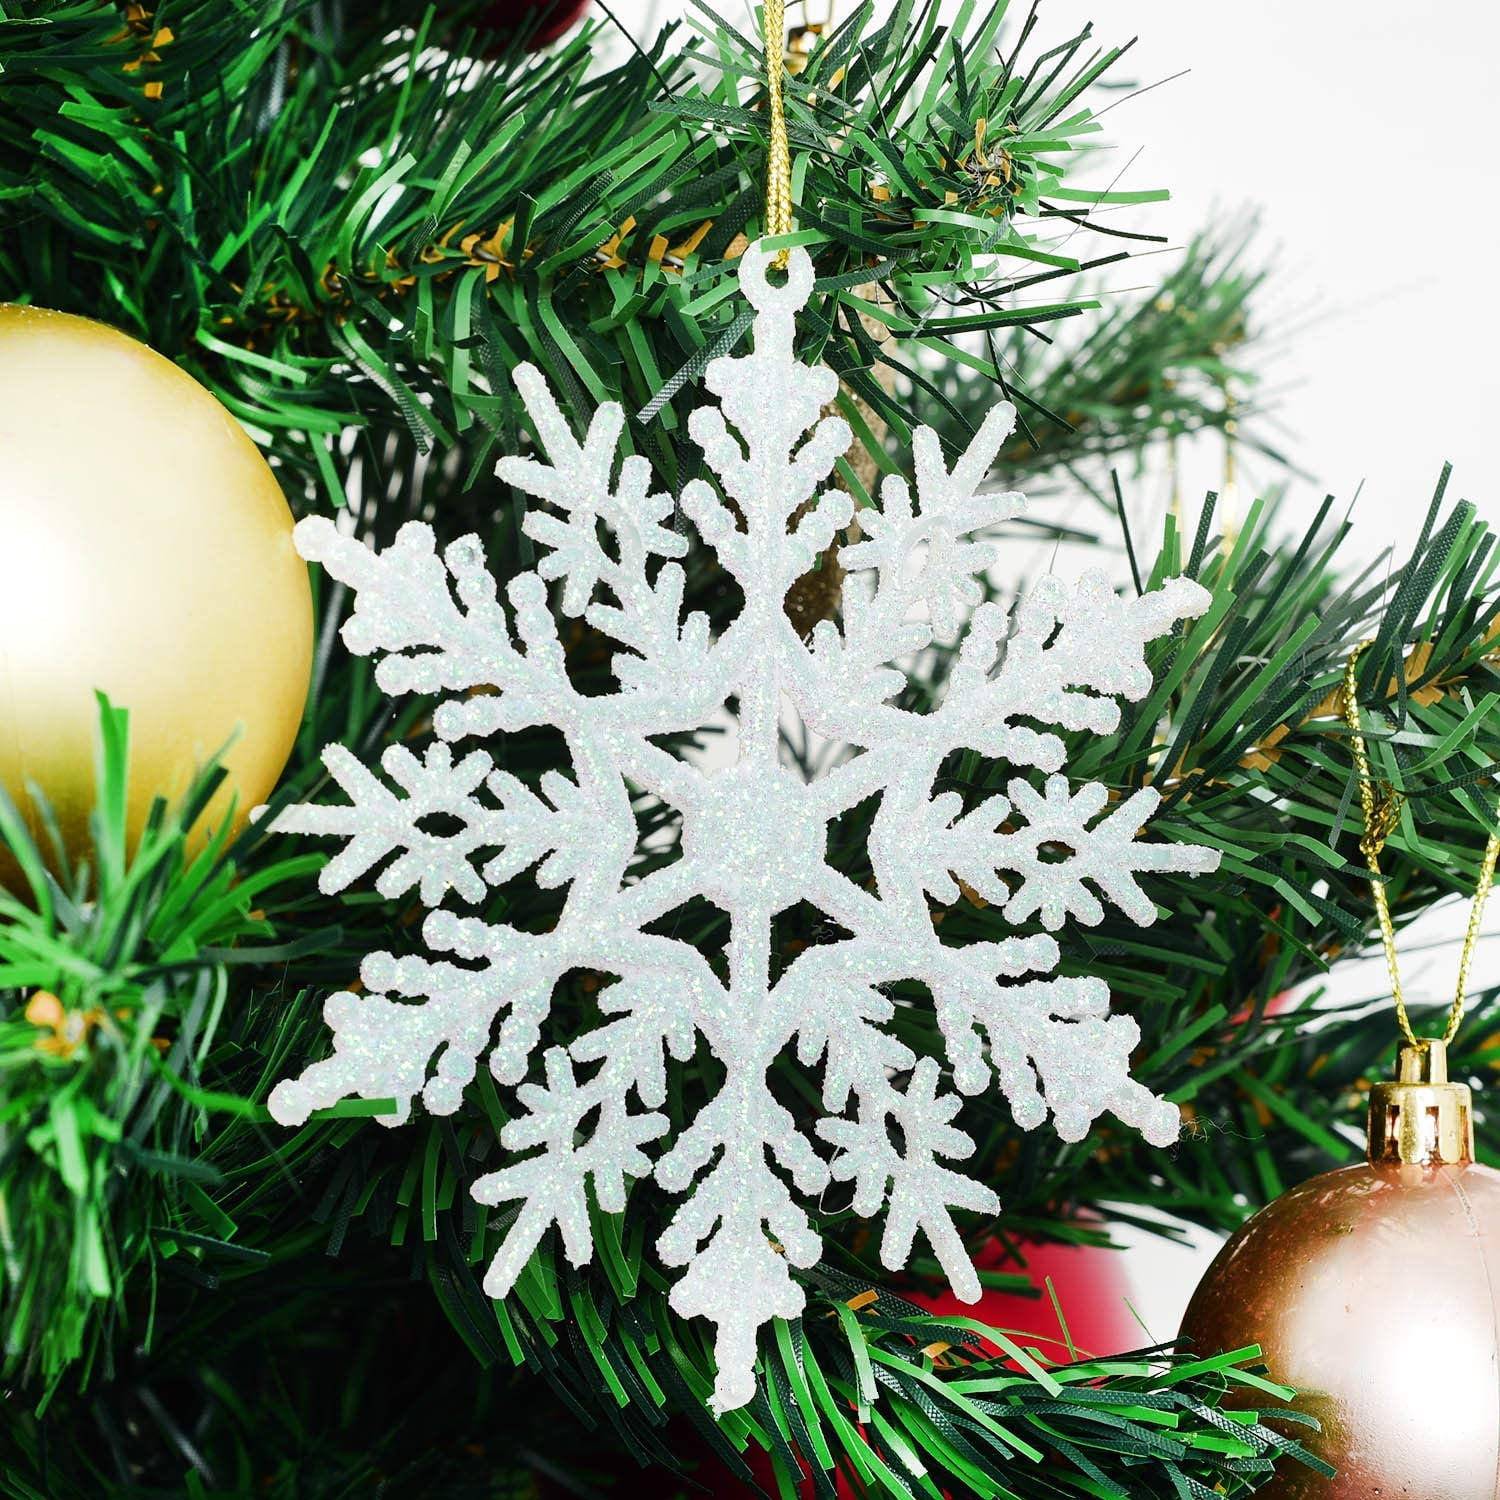 Newhomestyle 36pcs Christmas White Snowflake Ornaments Plastic Glitter Snow  Flakes Ornaments for Winter Christmas Tree Decorations Size Varies Craft